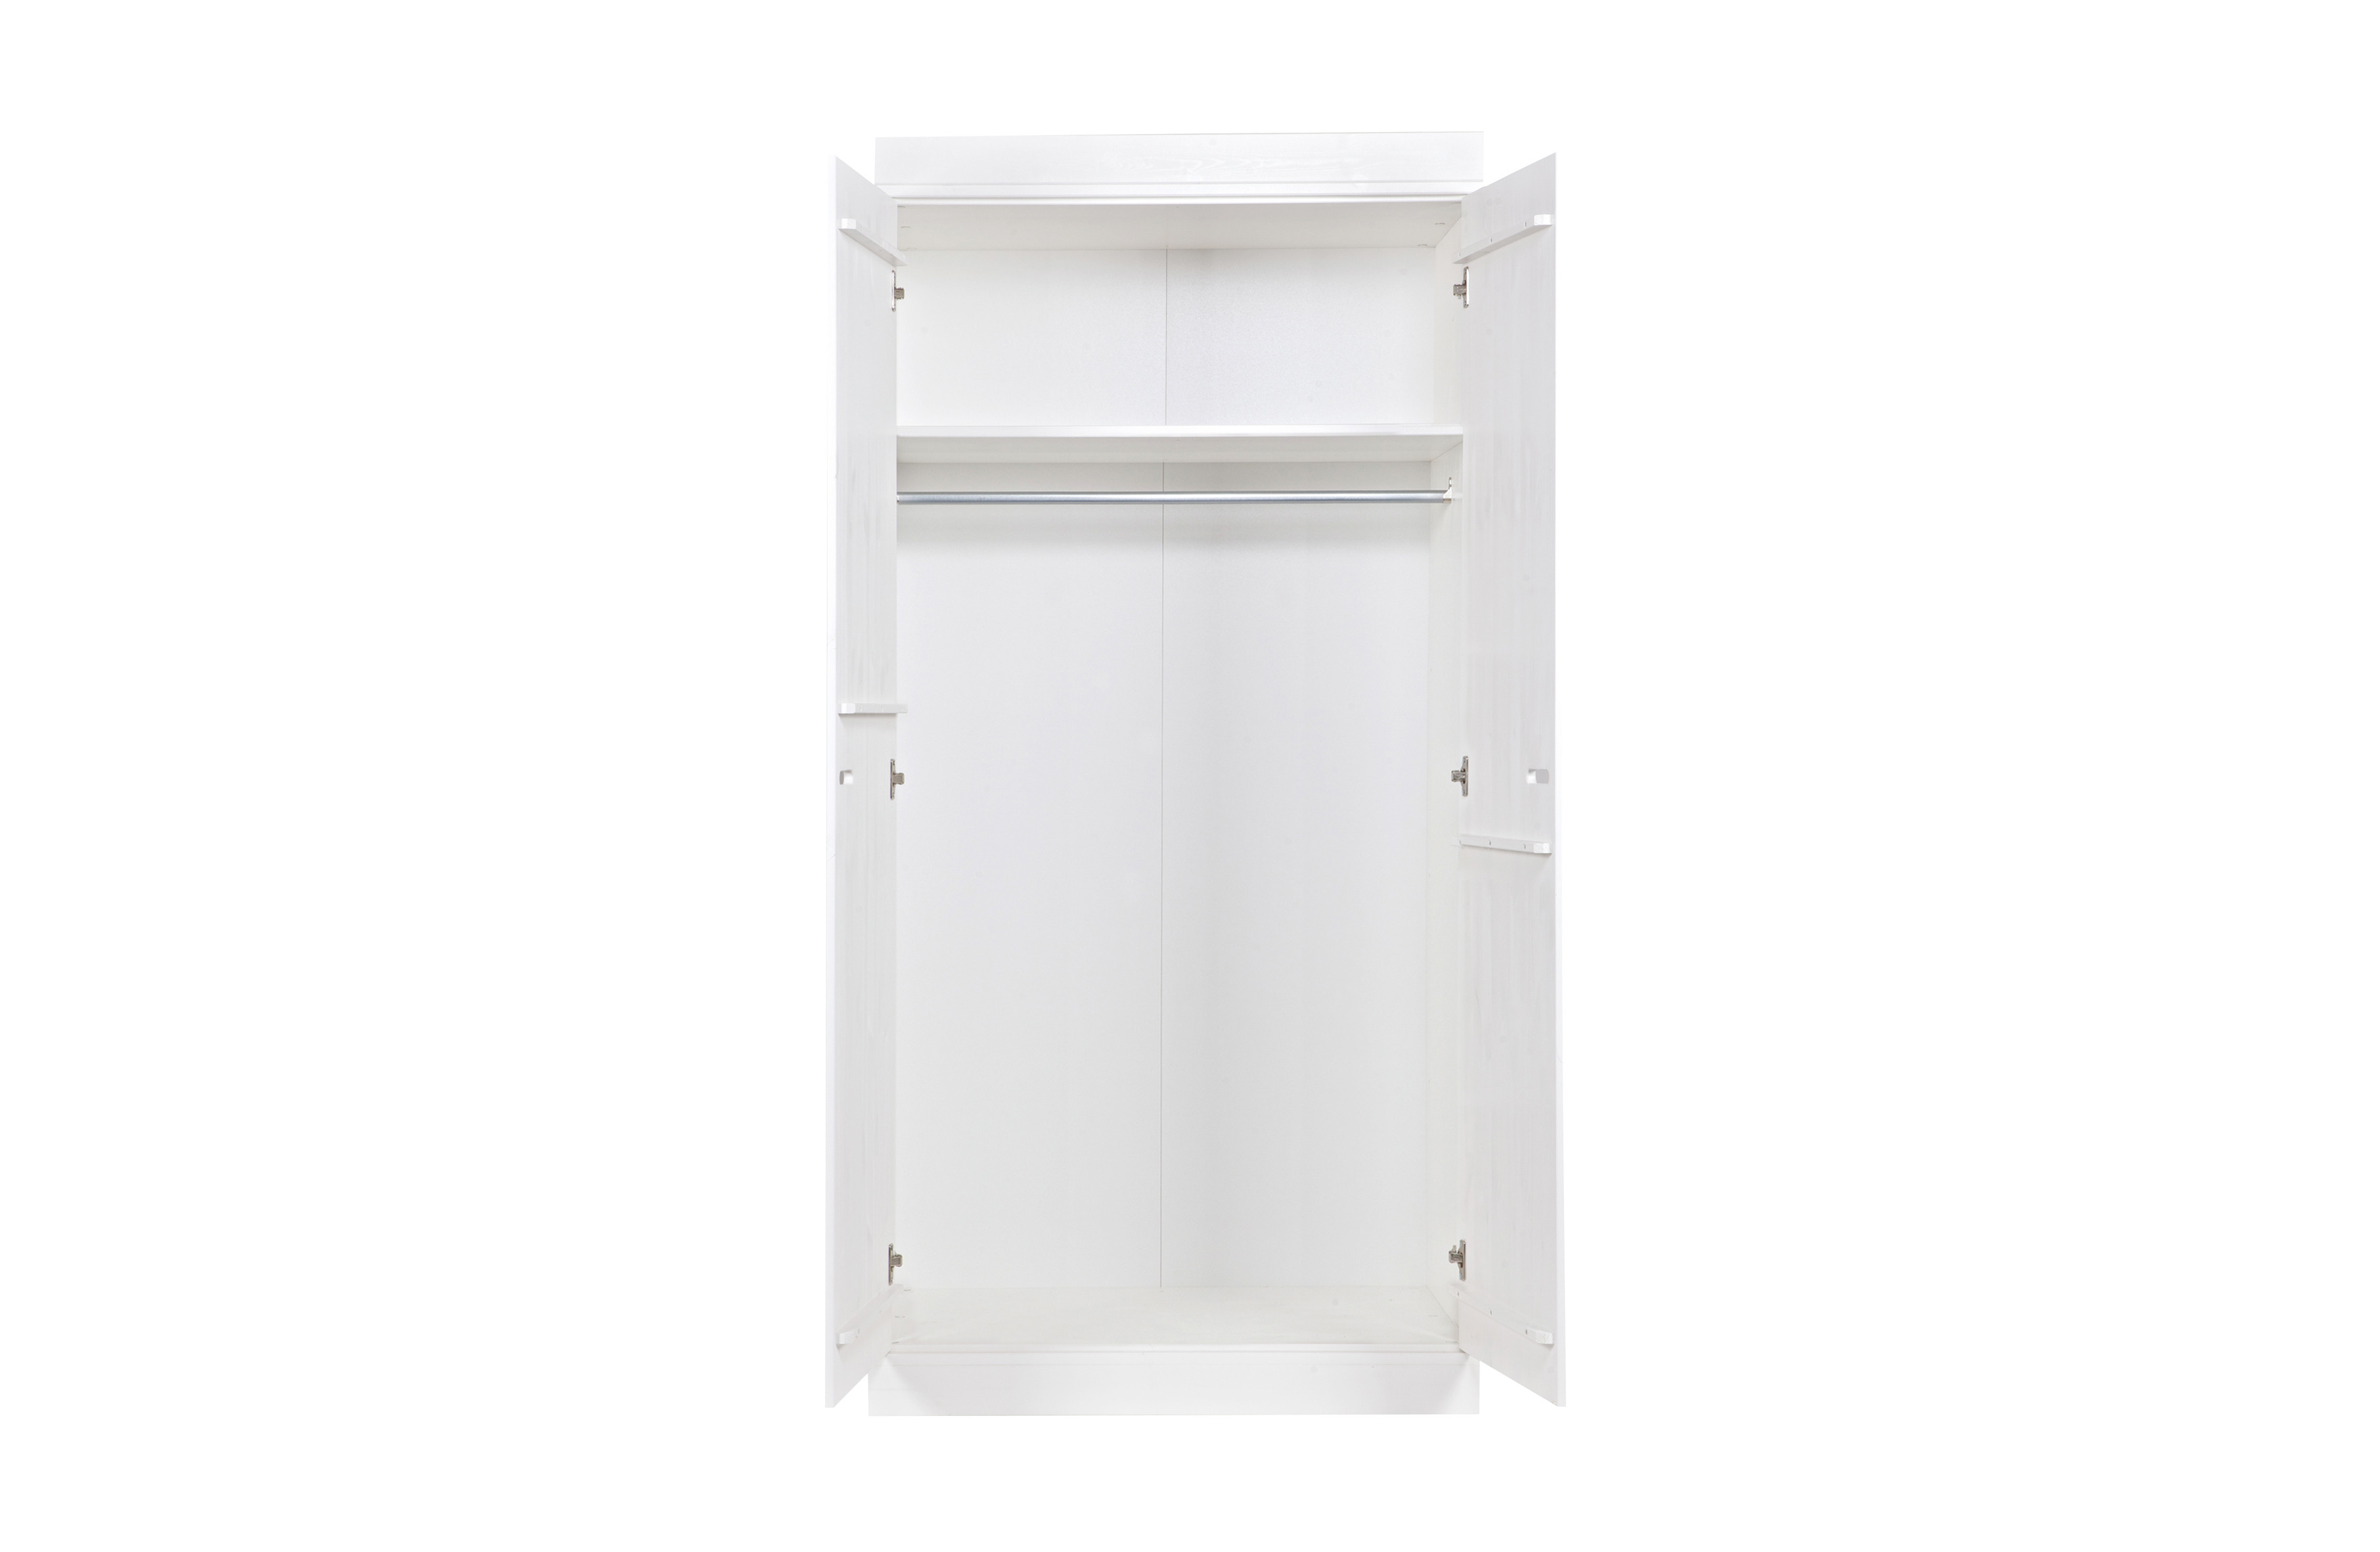 Rent a Closet Connect 2drs white? Rent at KeyPro furniture rental!